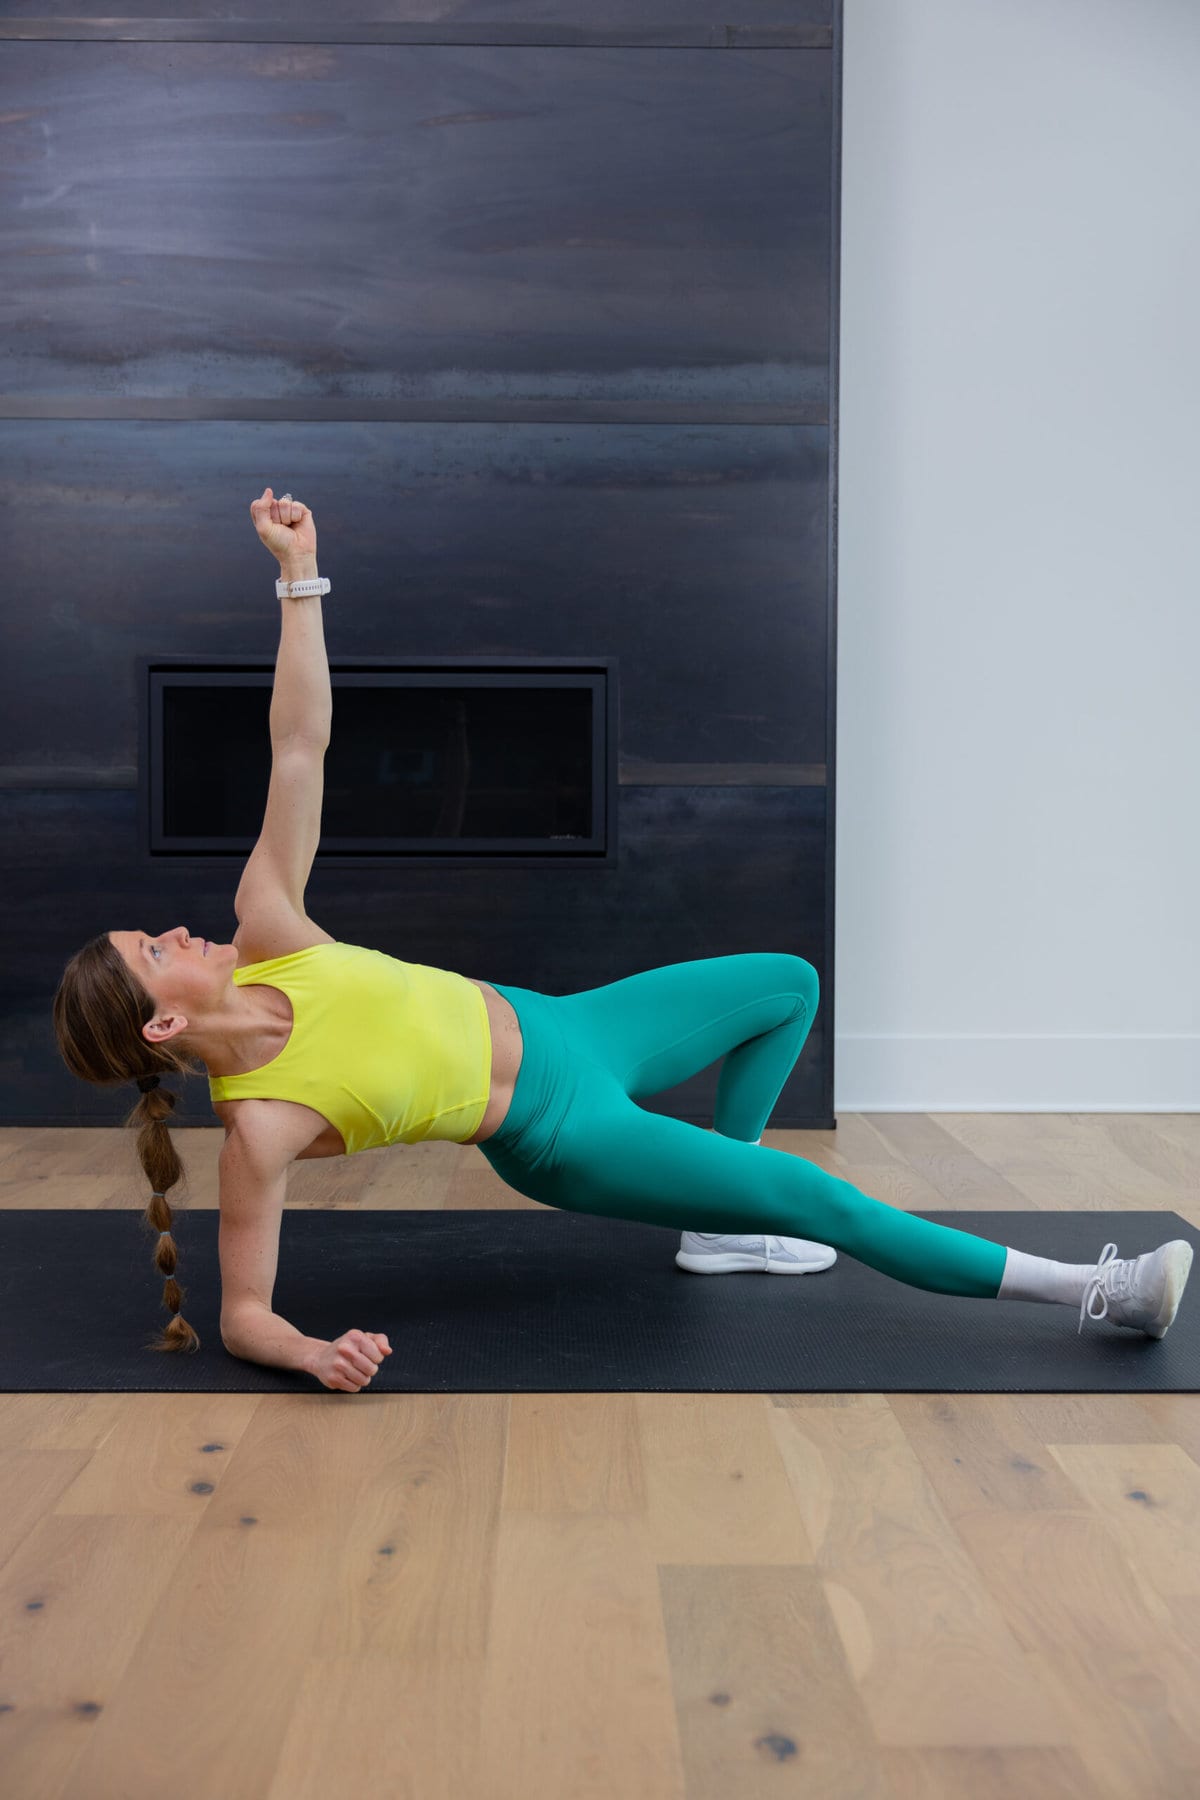 This abs workout for beginners sculpts a strong core in 4 moves